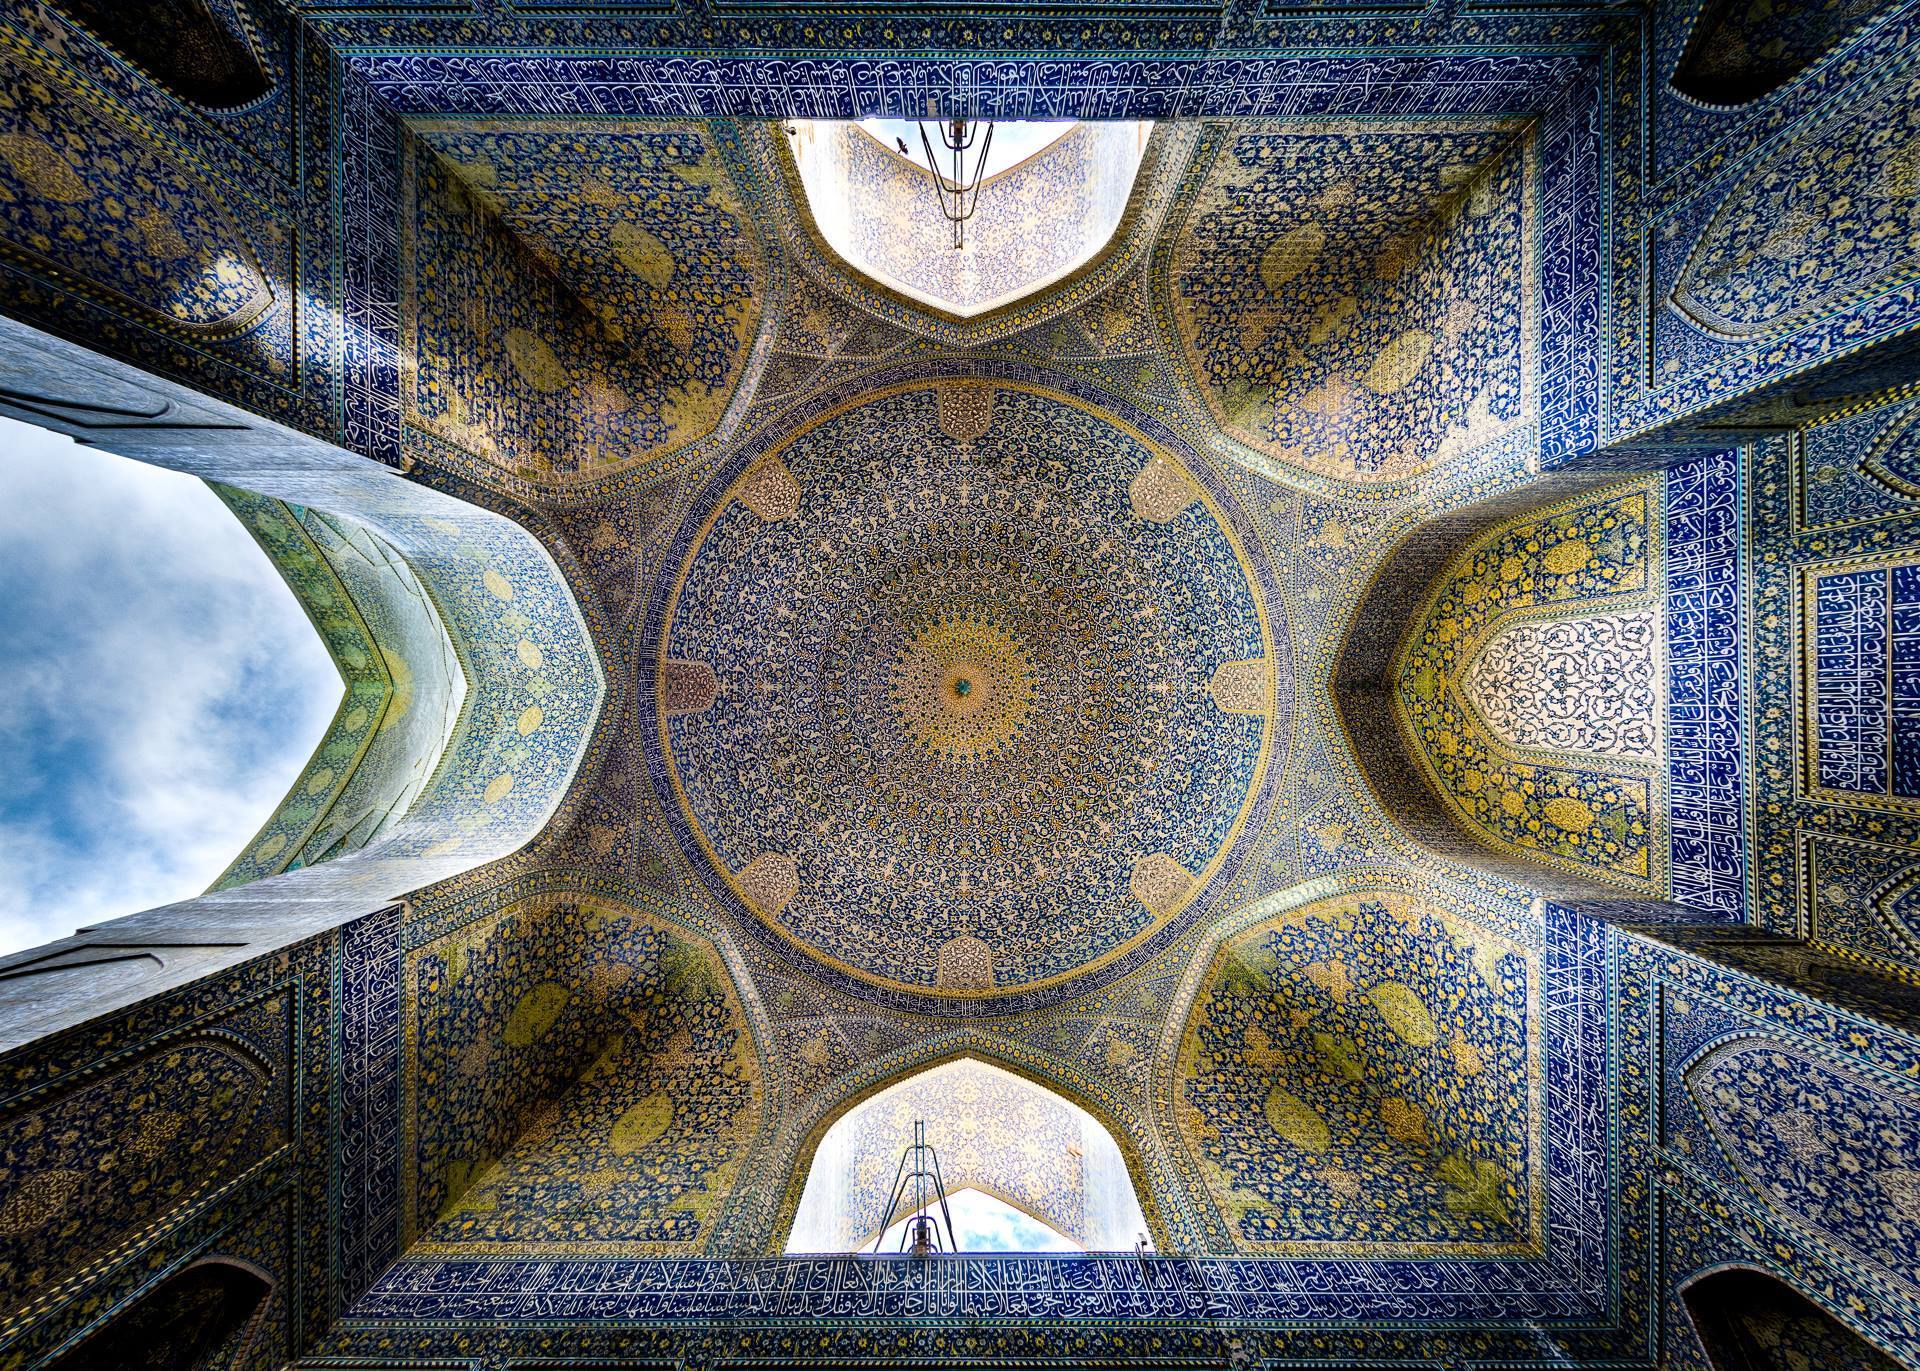 The famous Shah Mosque of Isfahan